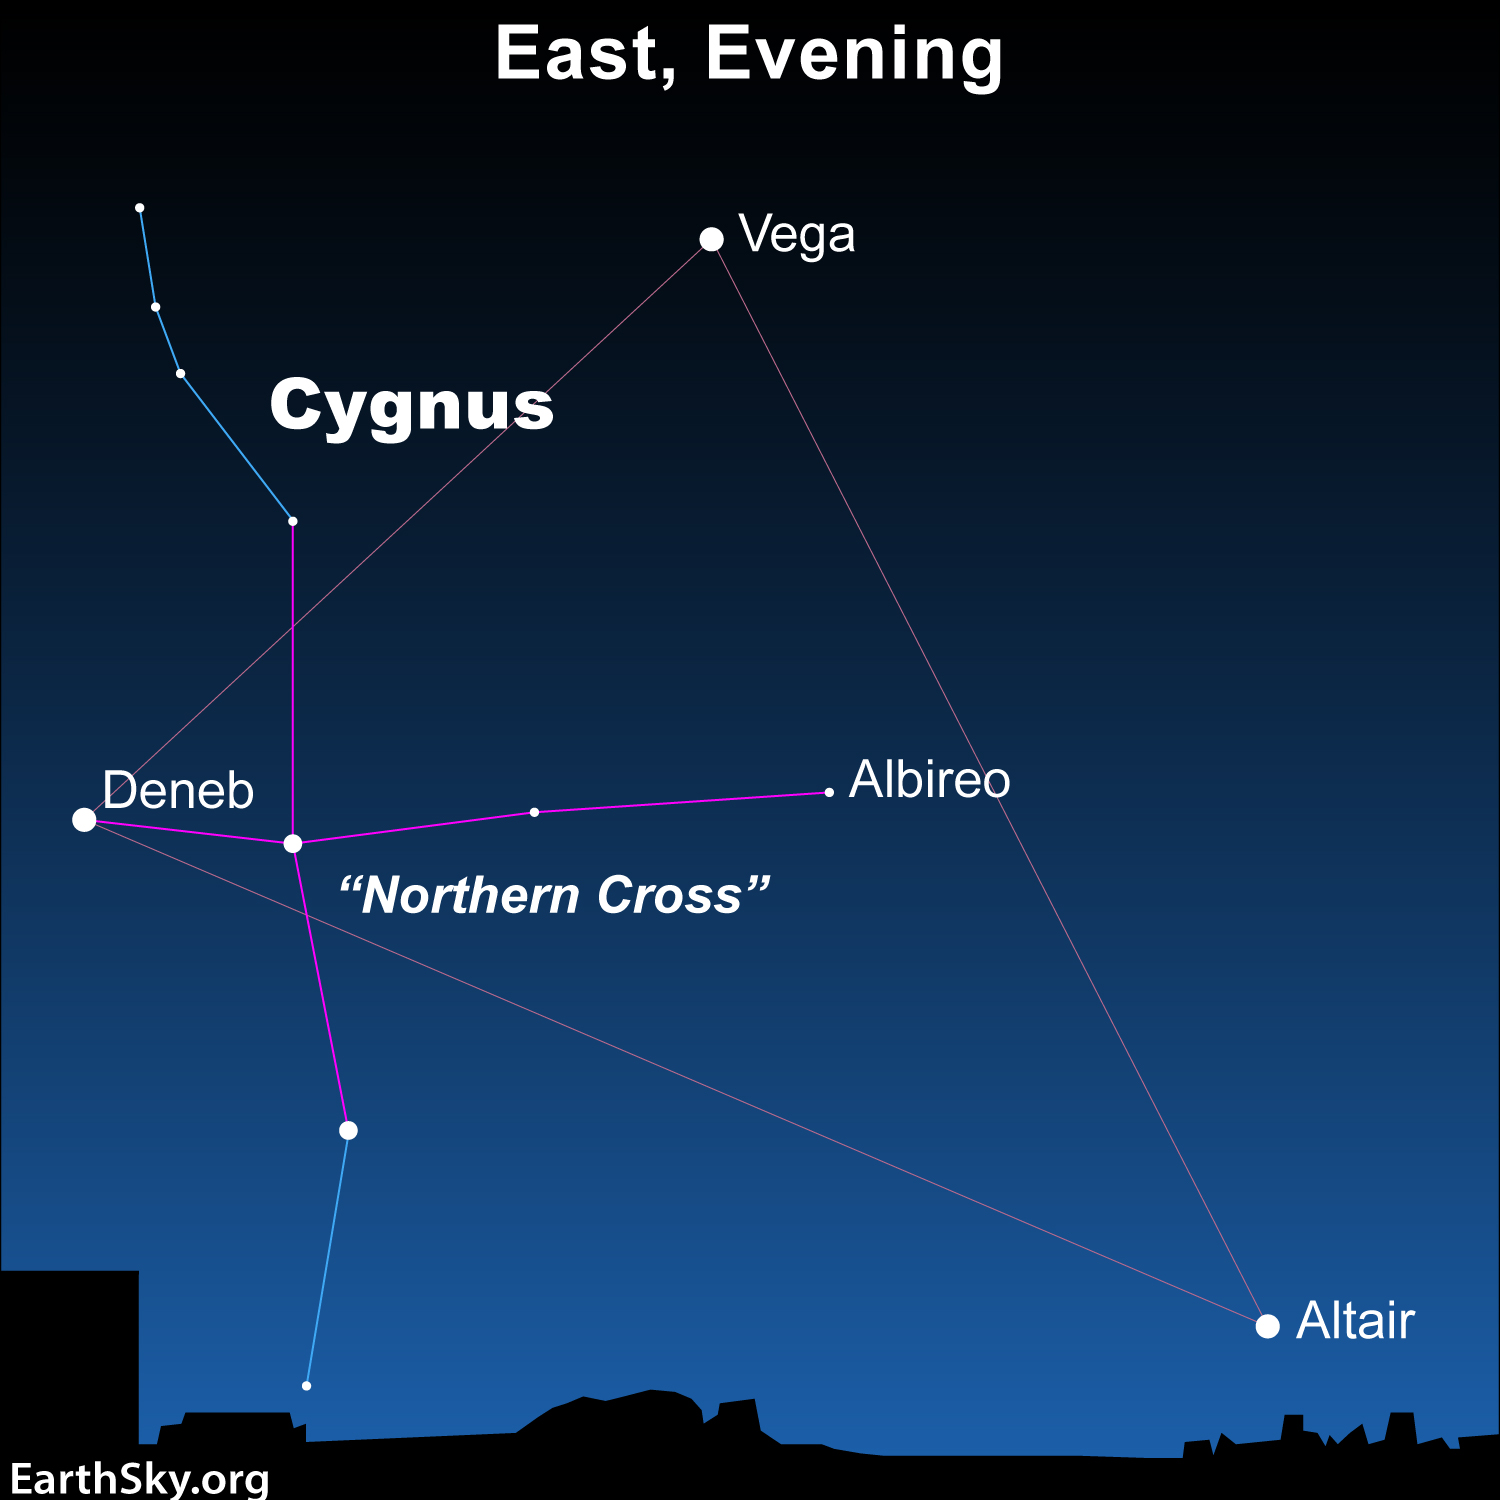 Northern cross: Star chart with a horizontal cross of stars inside a larger triangle pattern and some stars labeled.